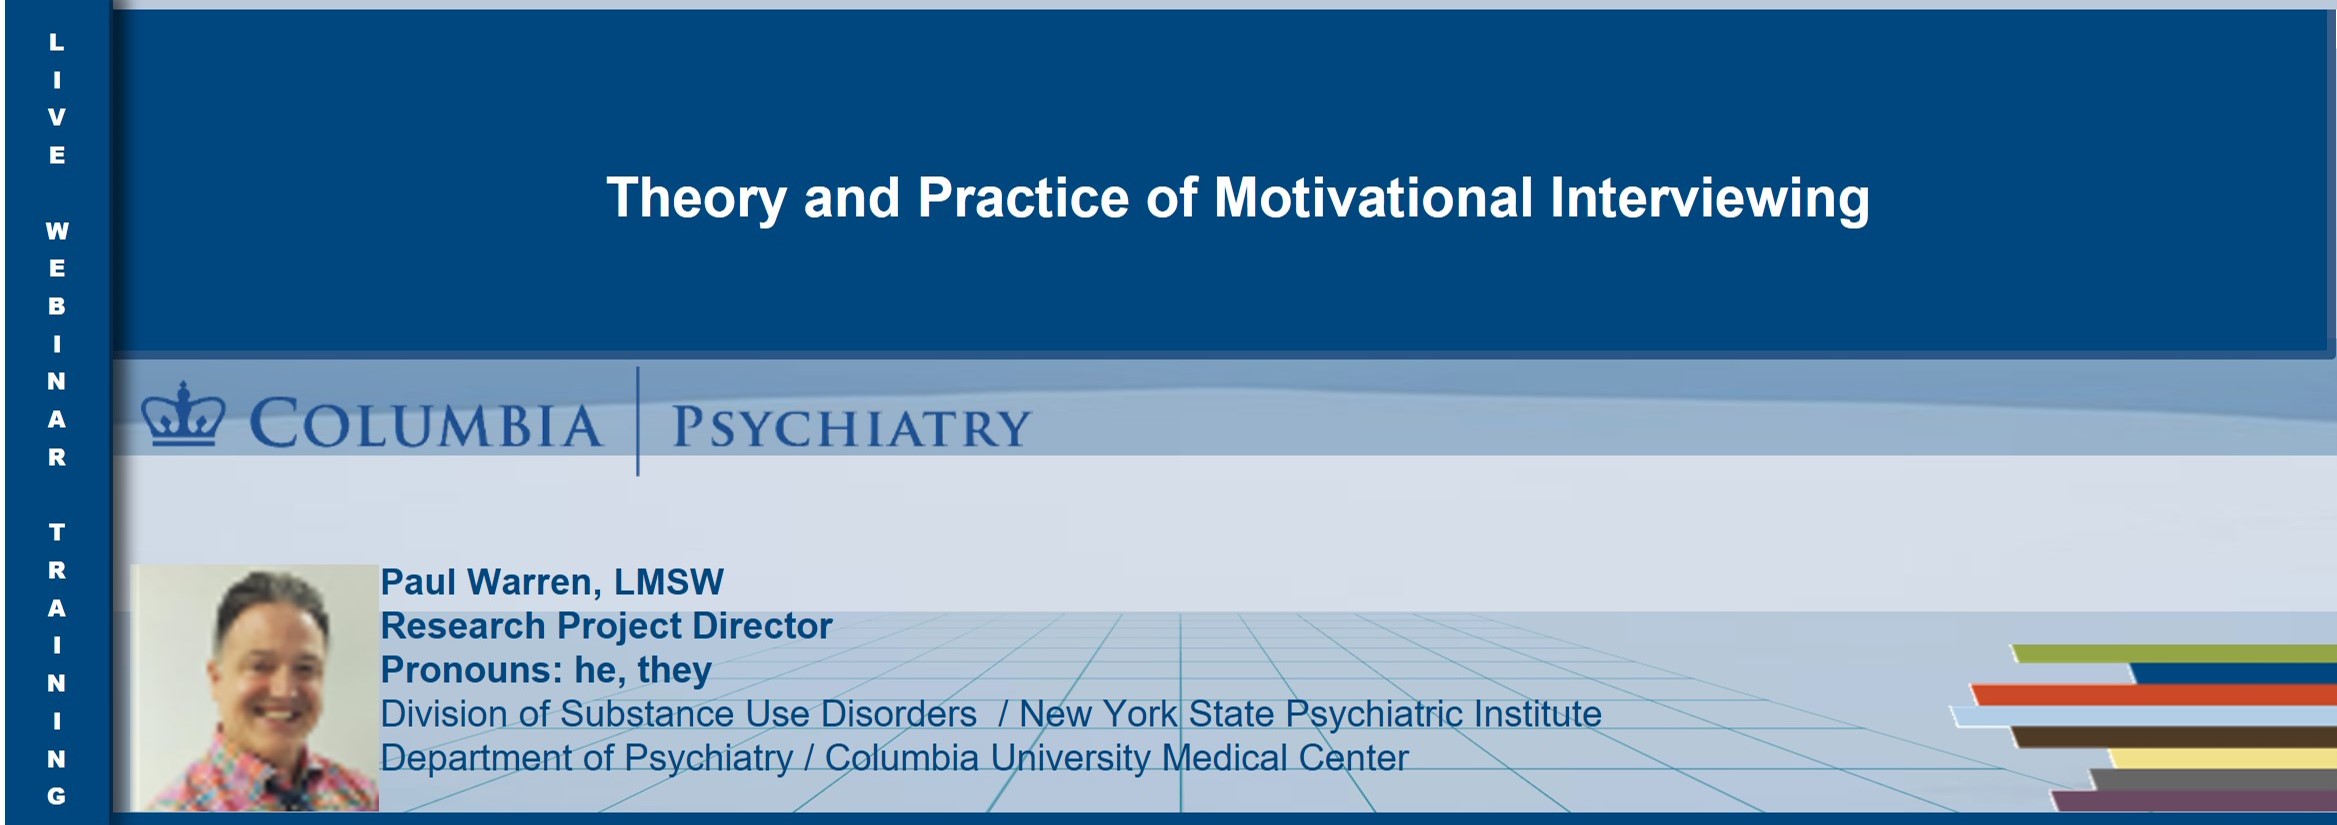 Theory and Practice of Motivational Interviewing